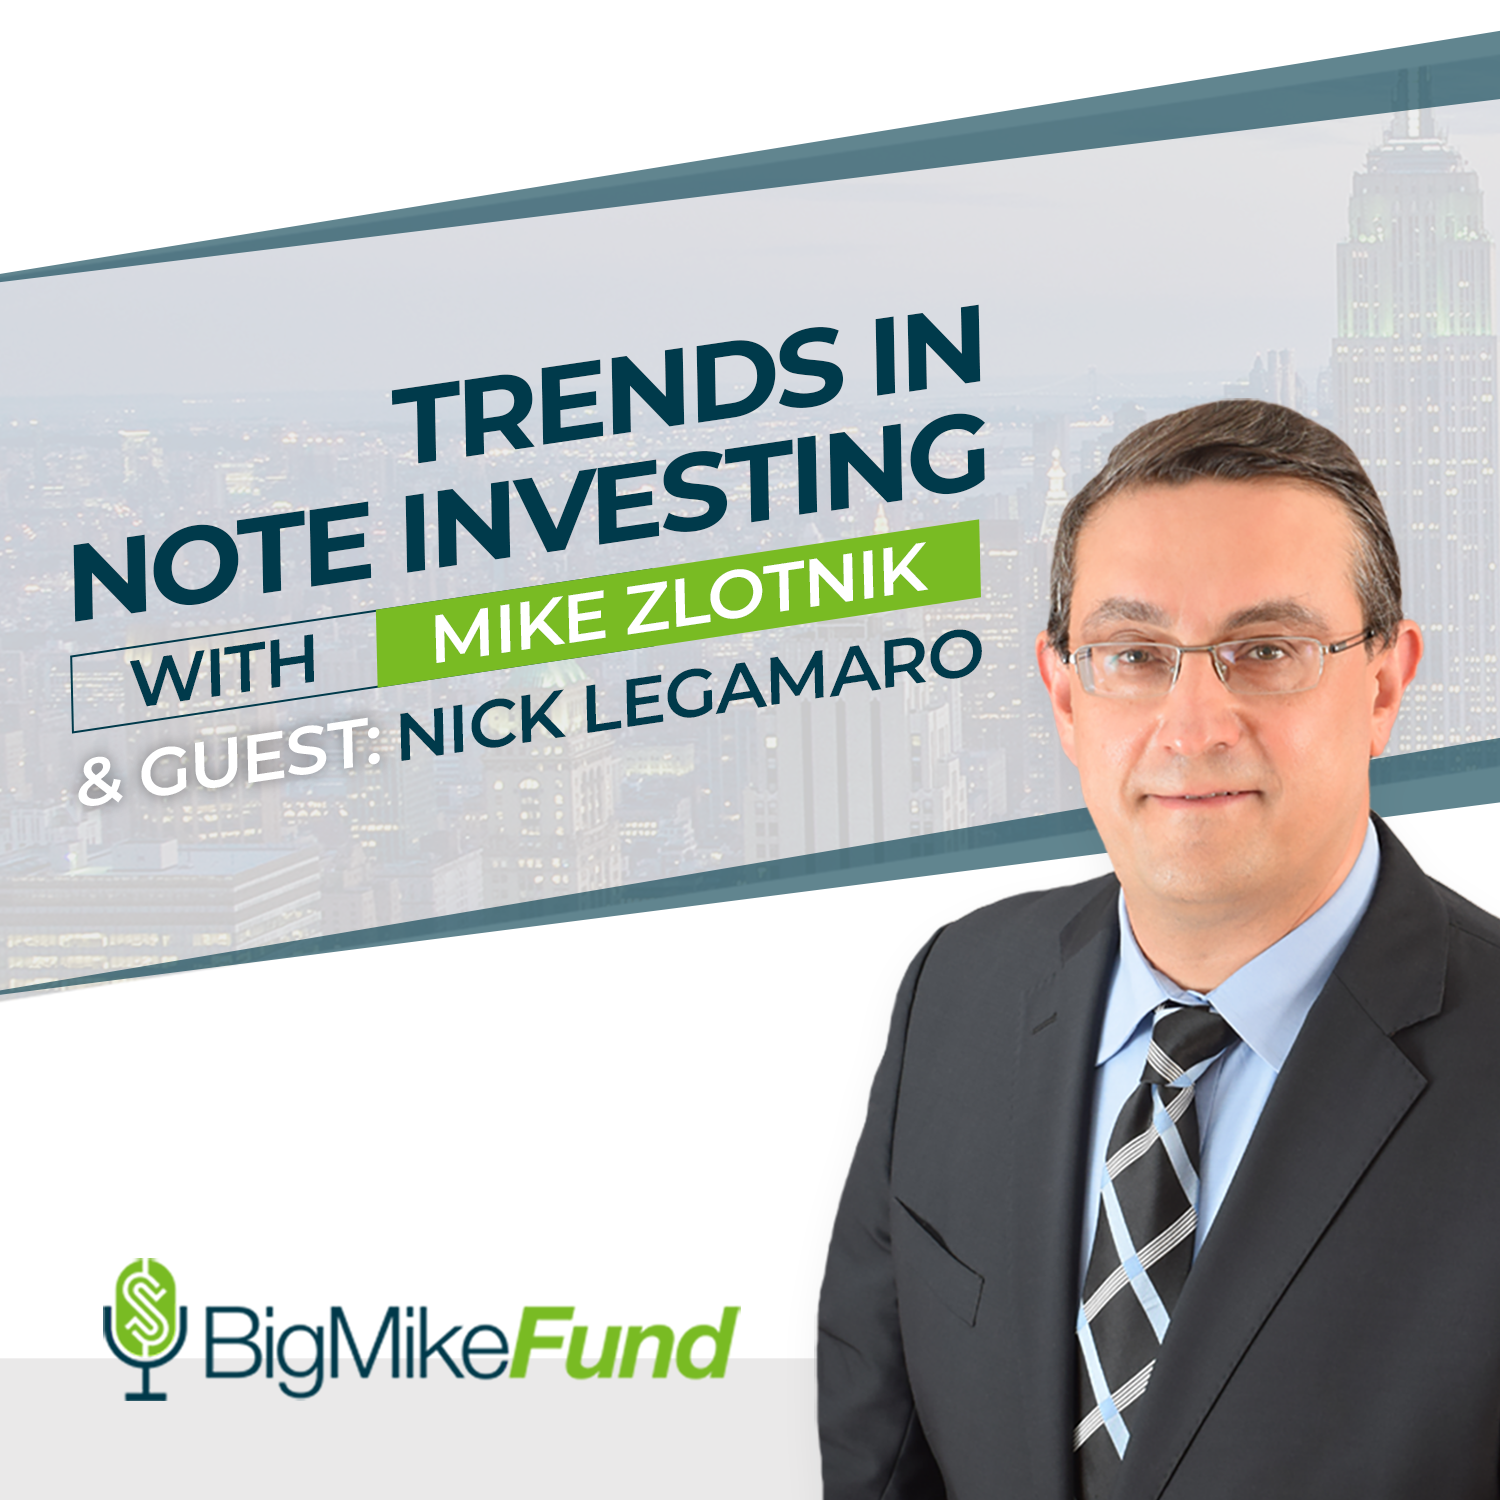 100: Trends in Note Investing with Nick Legamaro